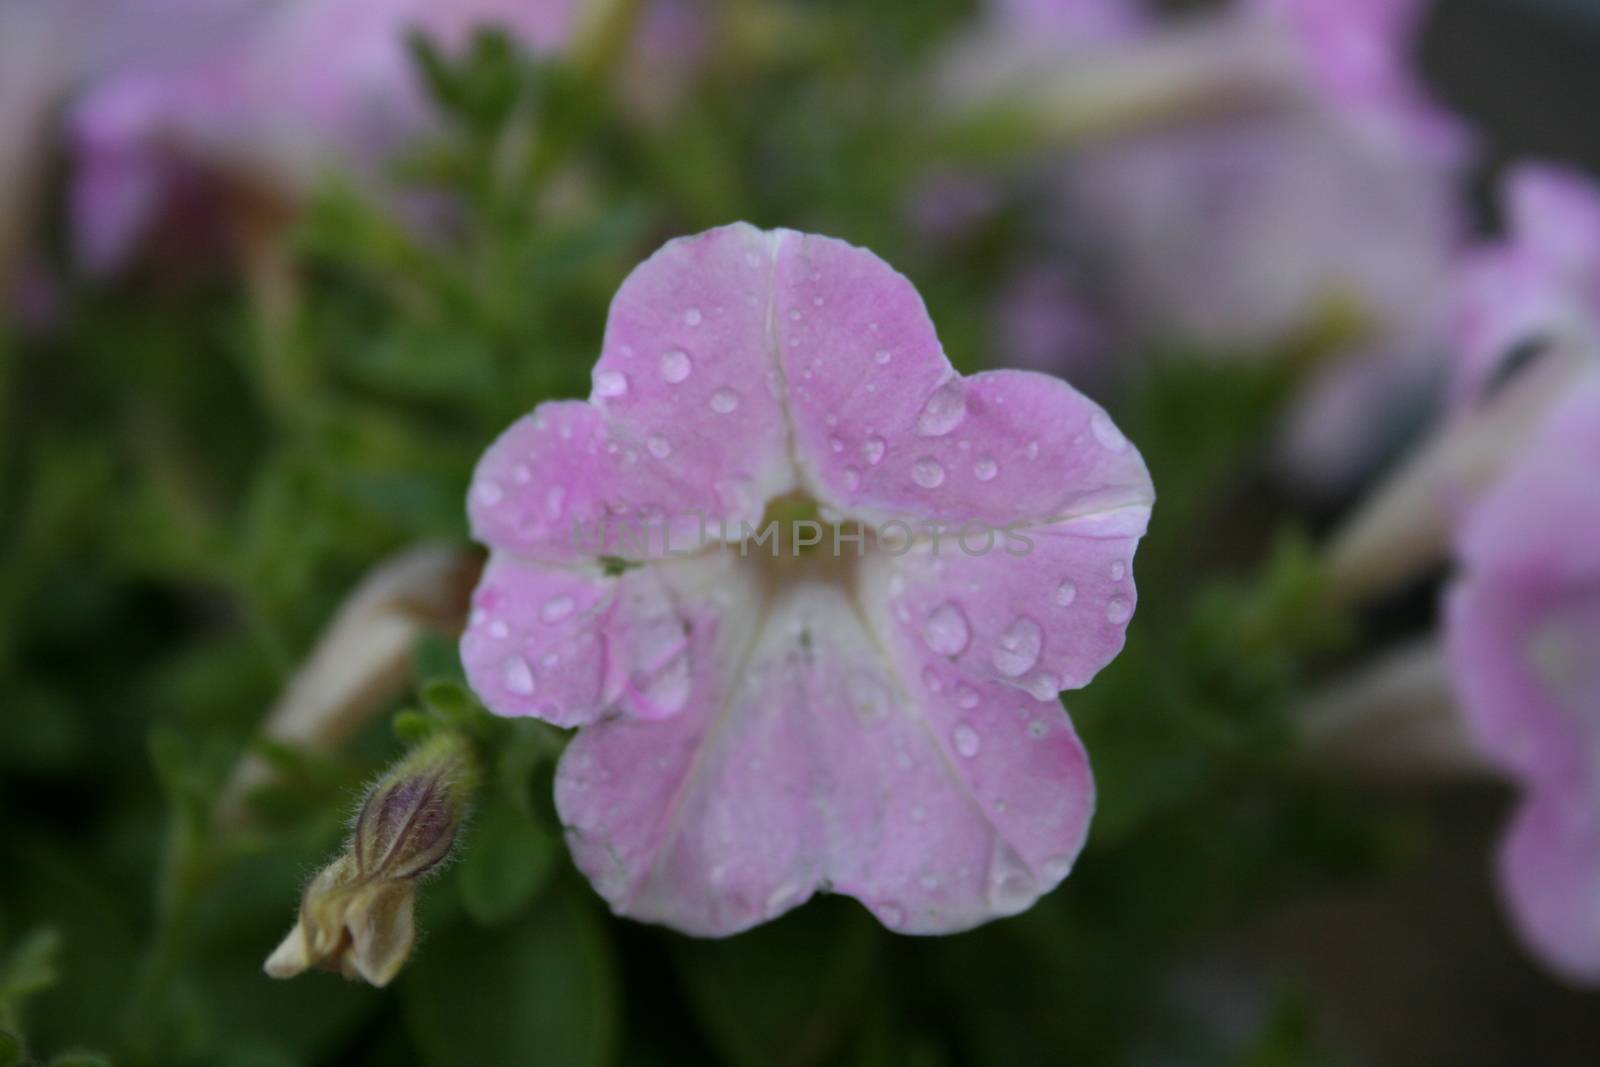 Close-up of a purple flower with dew drops